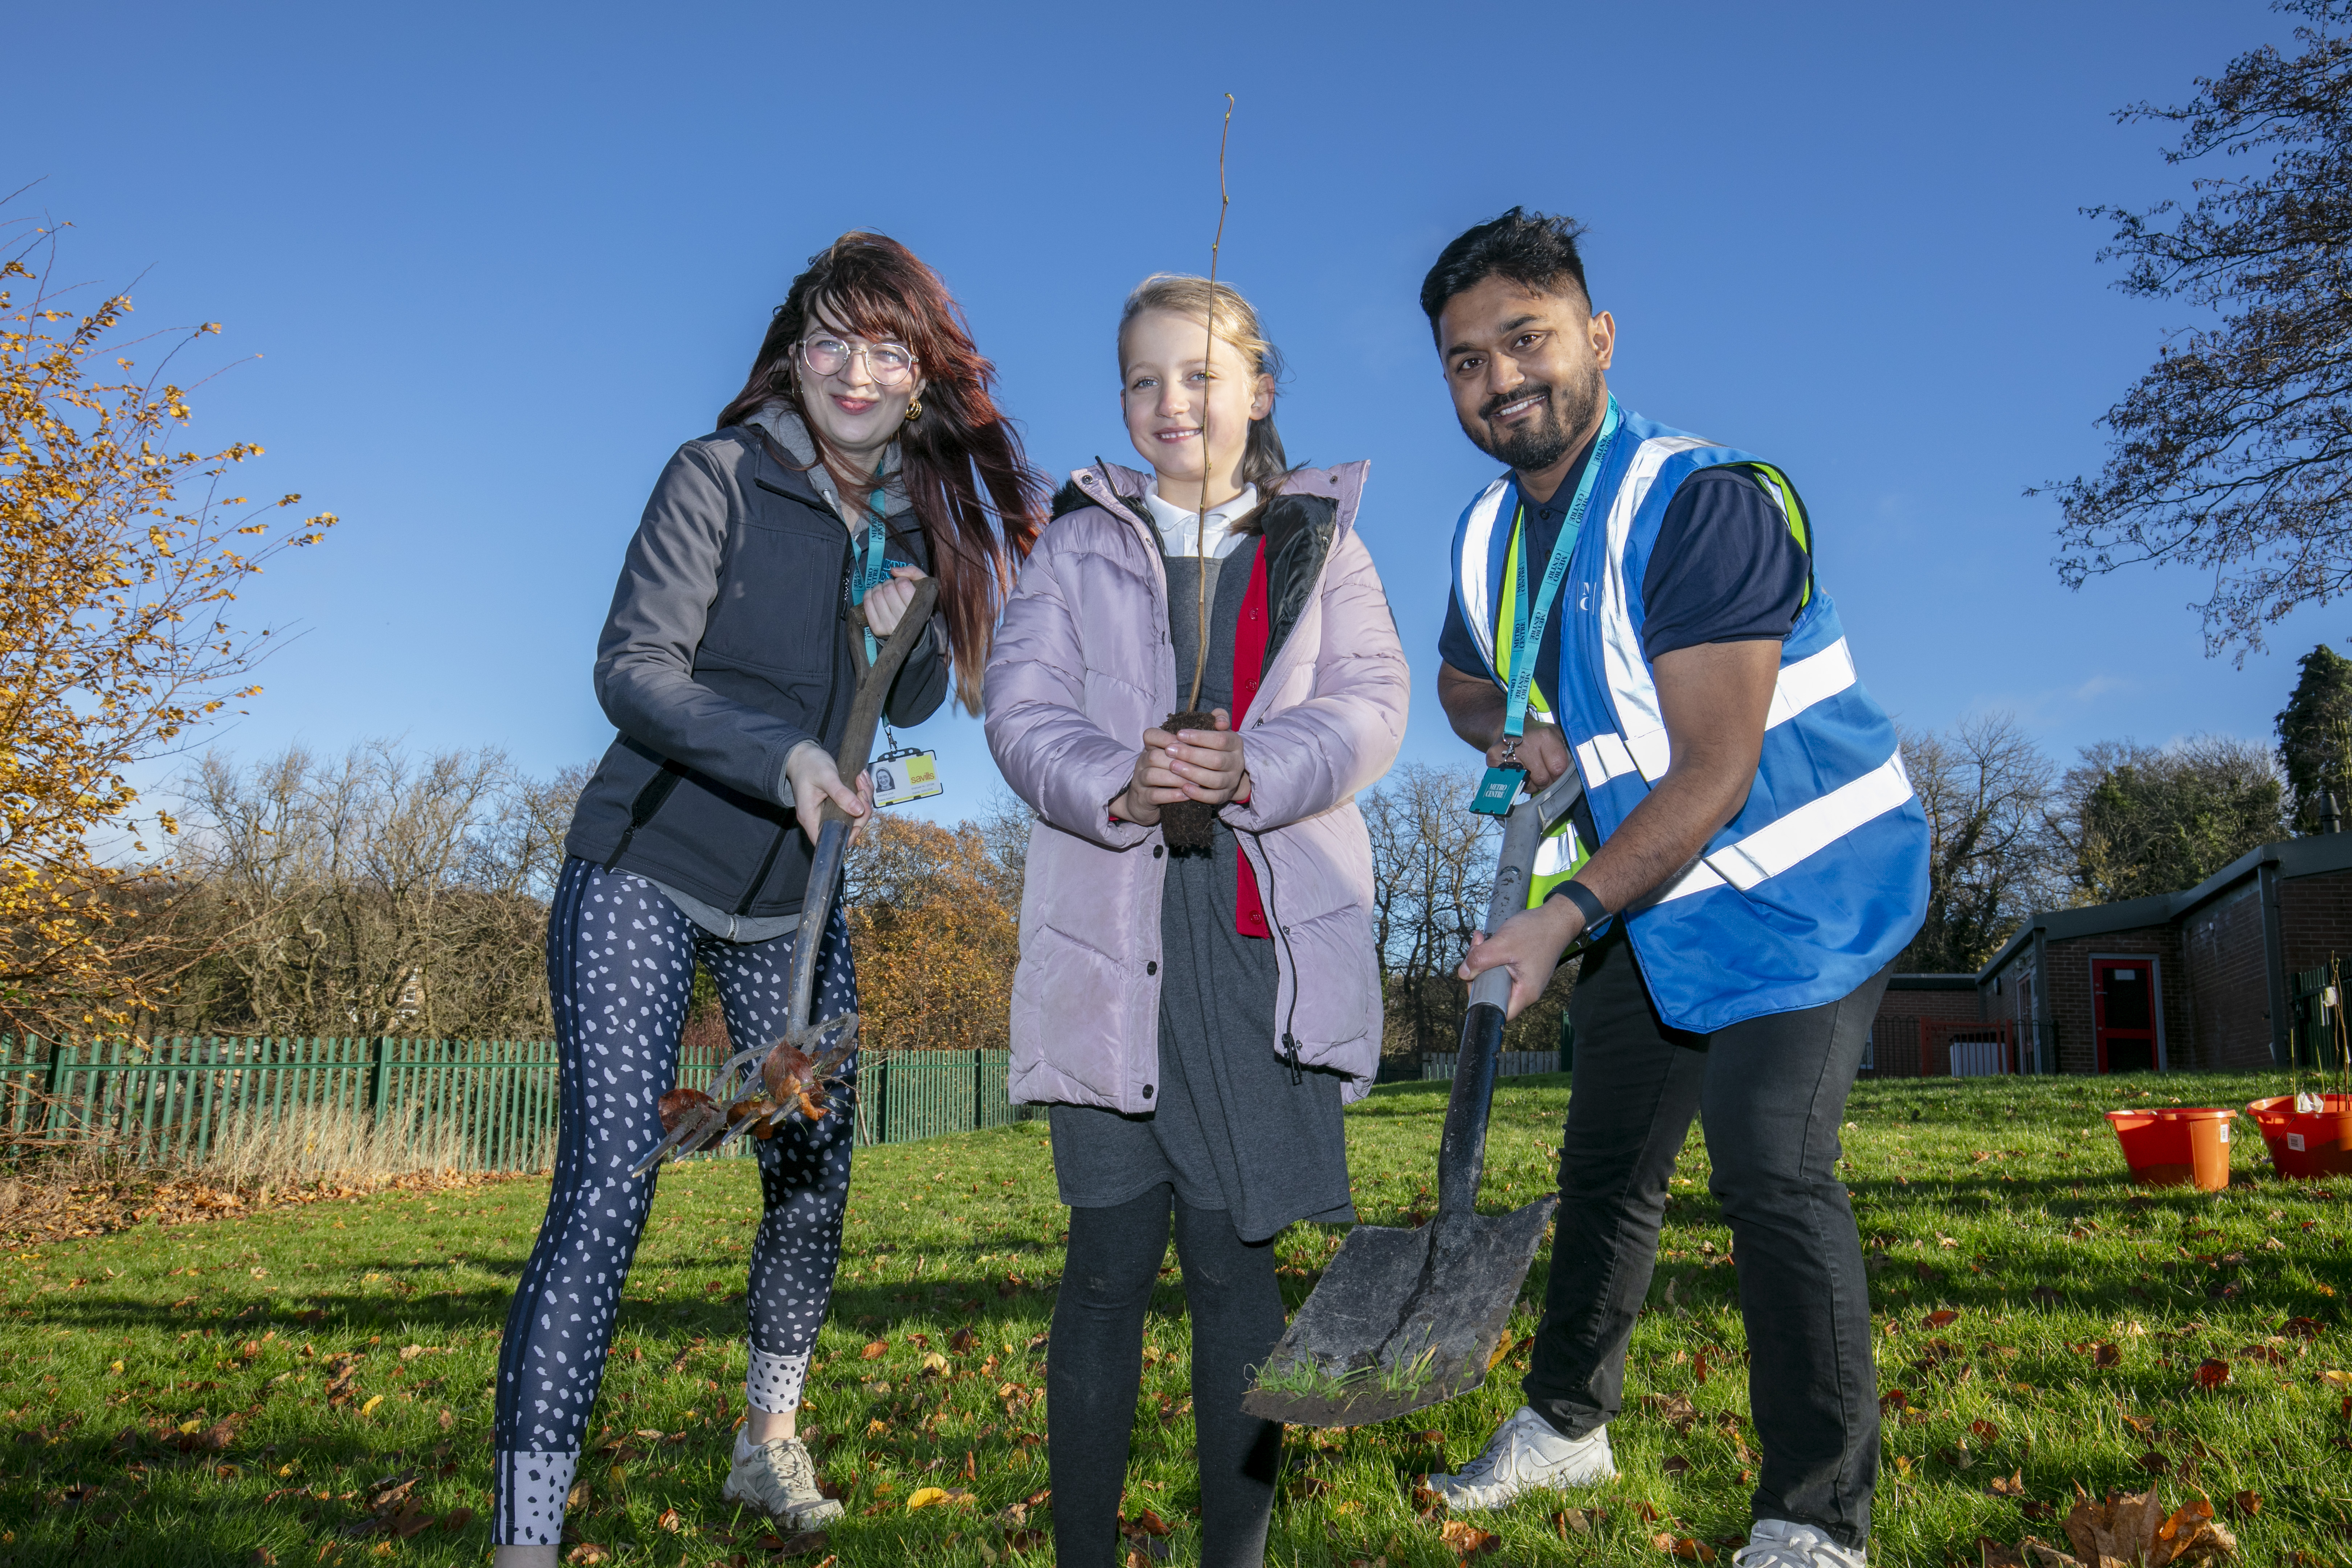 Three people stood in a grassy field . On the far left a woman is holding a long trowel with leaves attached, in the middle a young girl is holding a tree sprout. On the right a man is in a blue hi-vis holding a shovel.